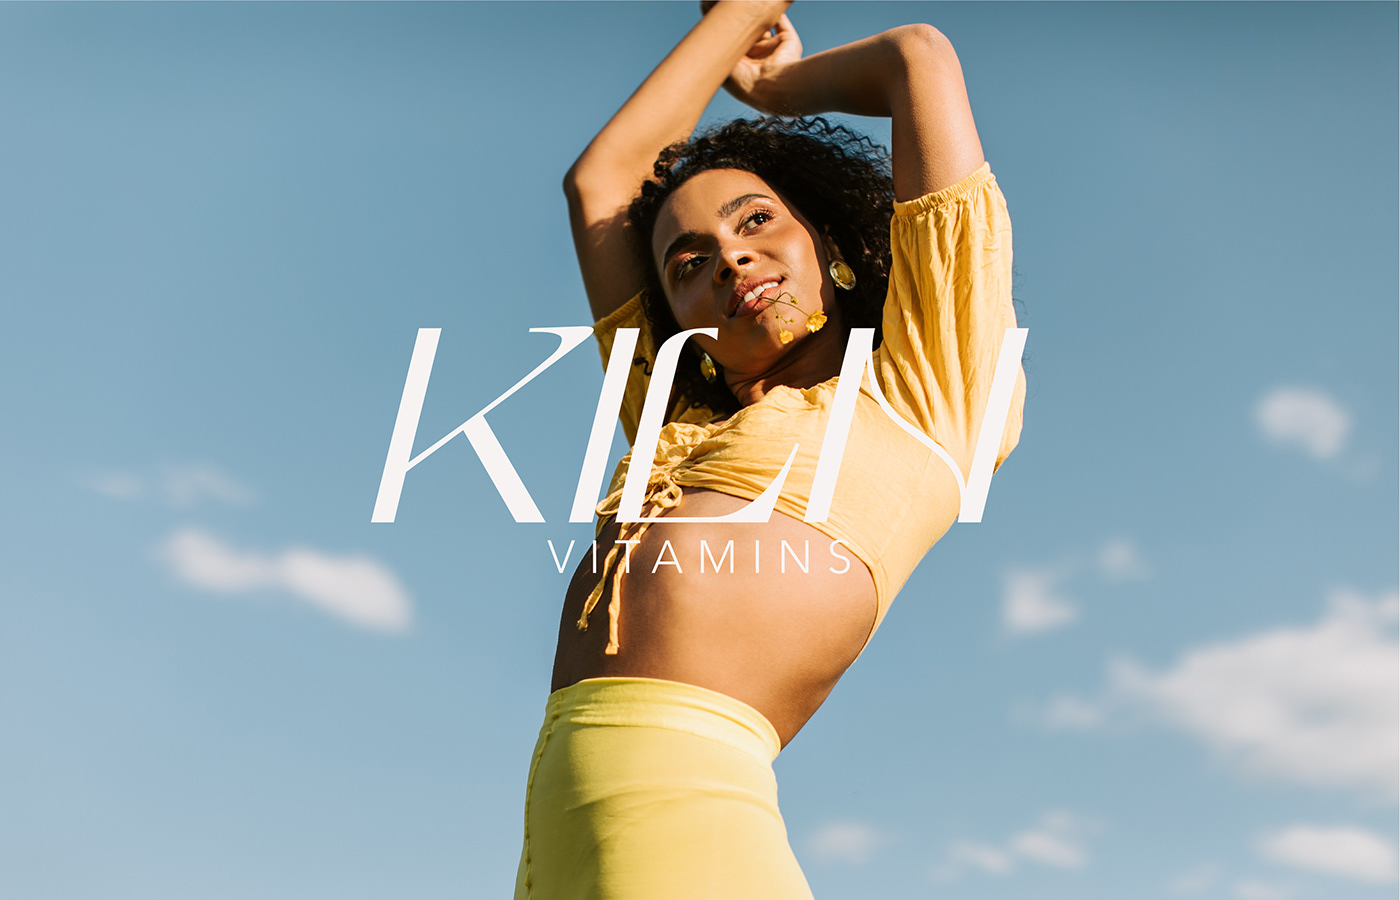 Logo marque for Kiln Vitamins, featuring italic serif typeface against brand photography.